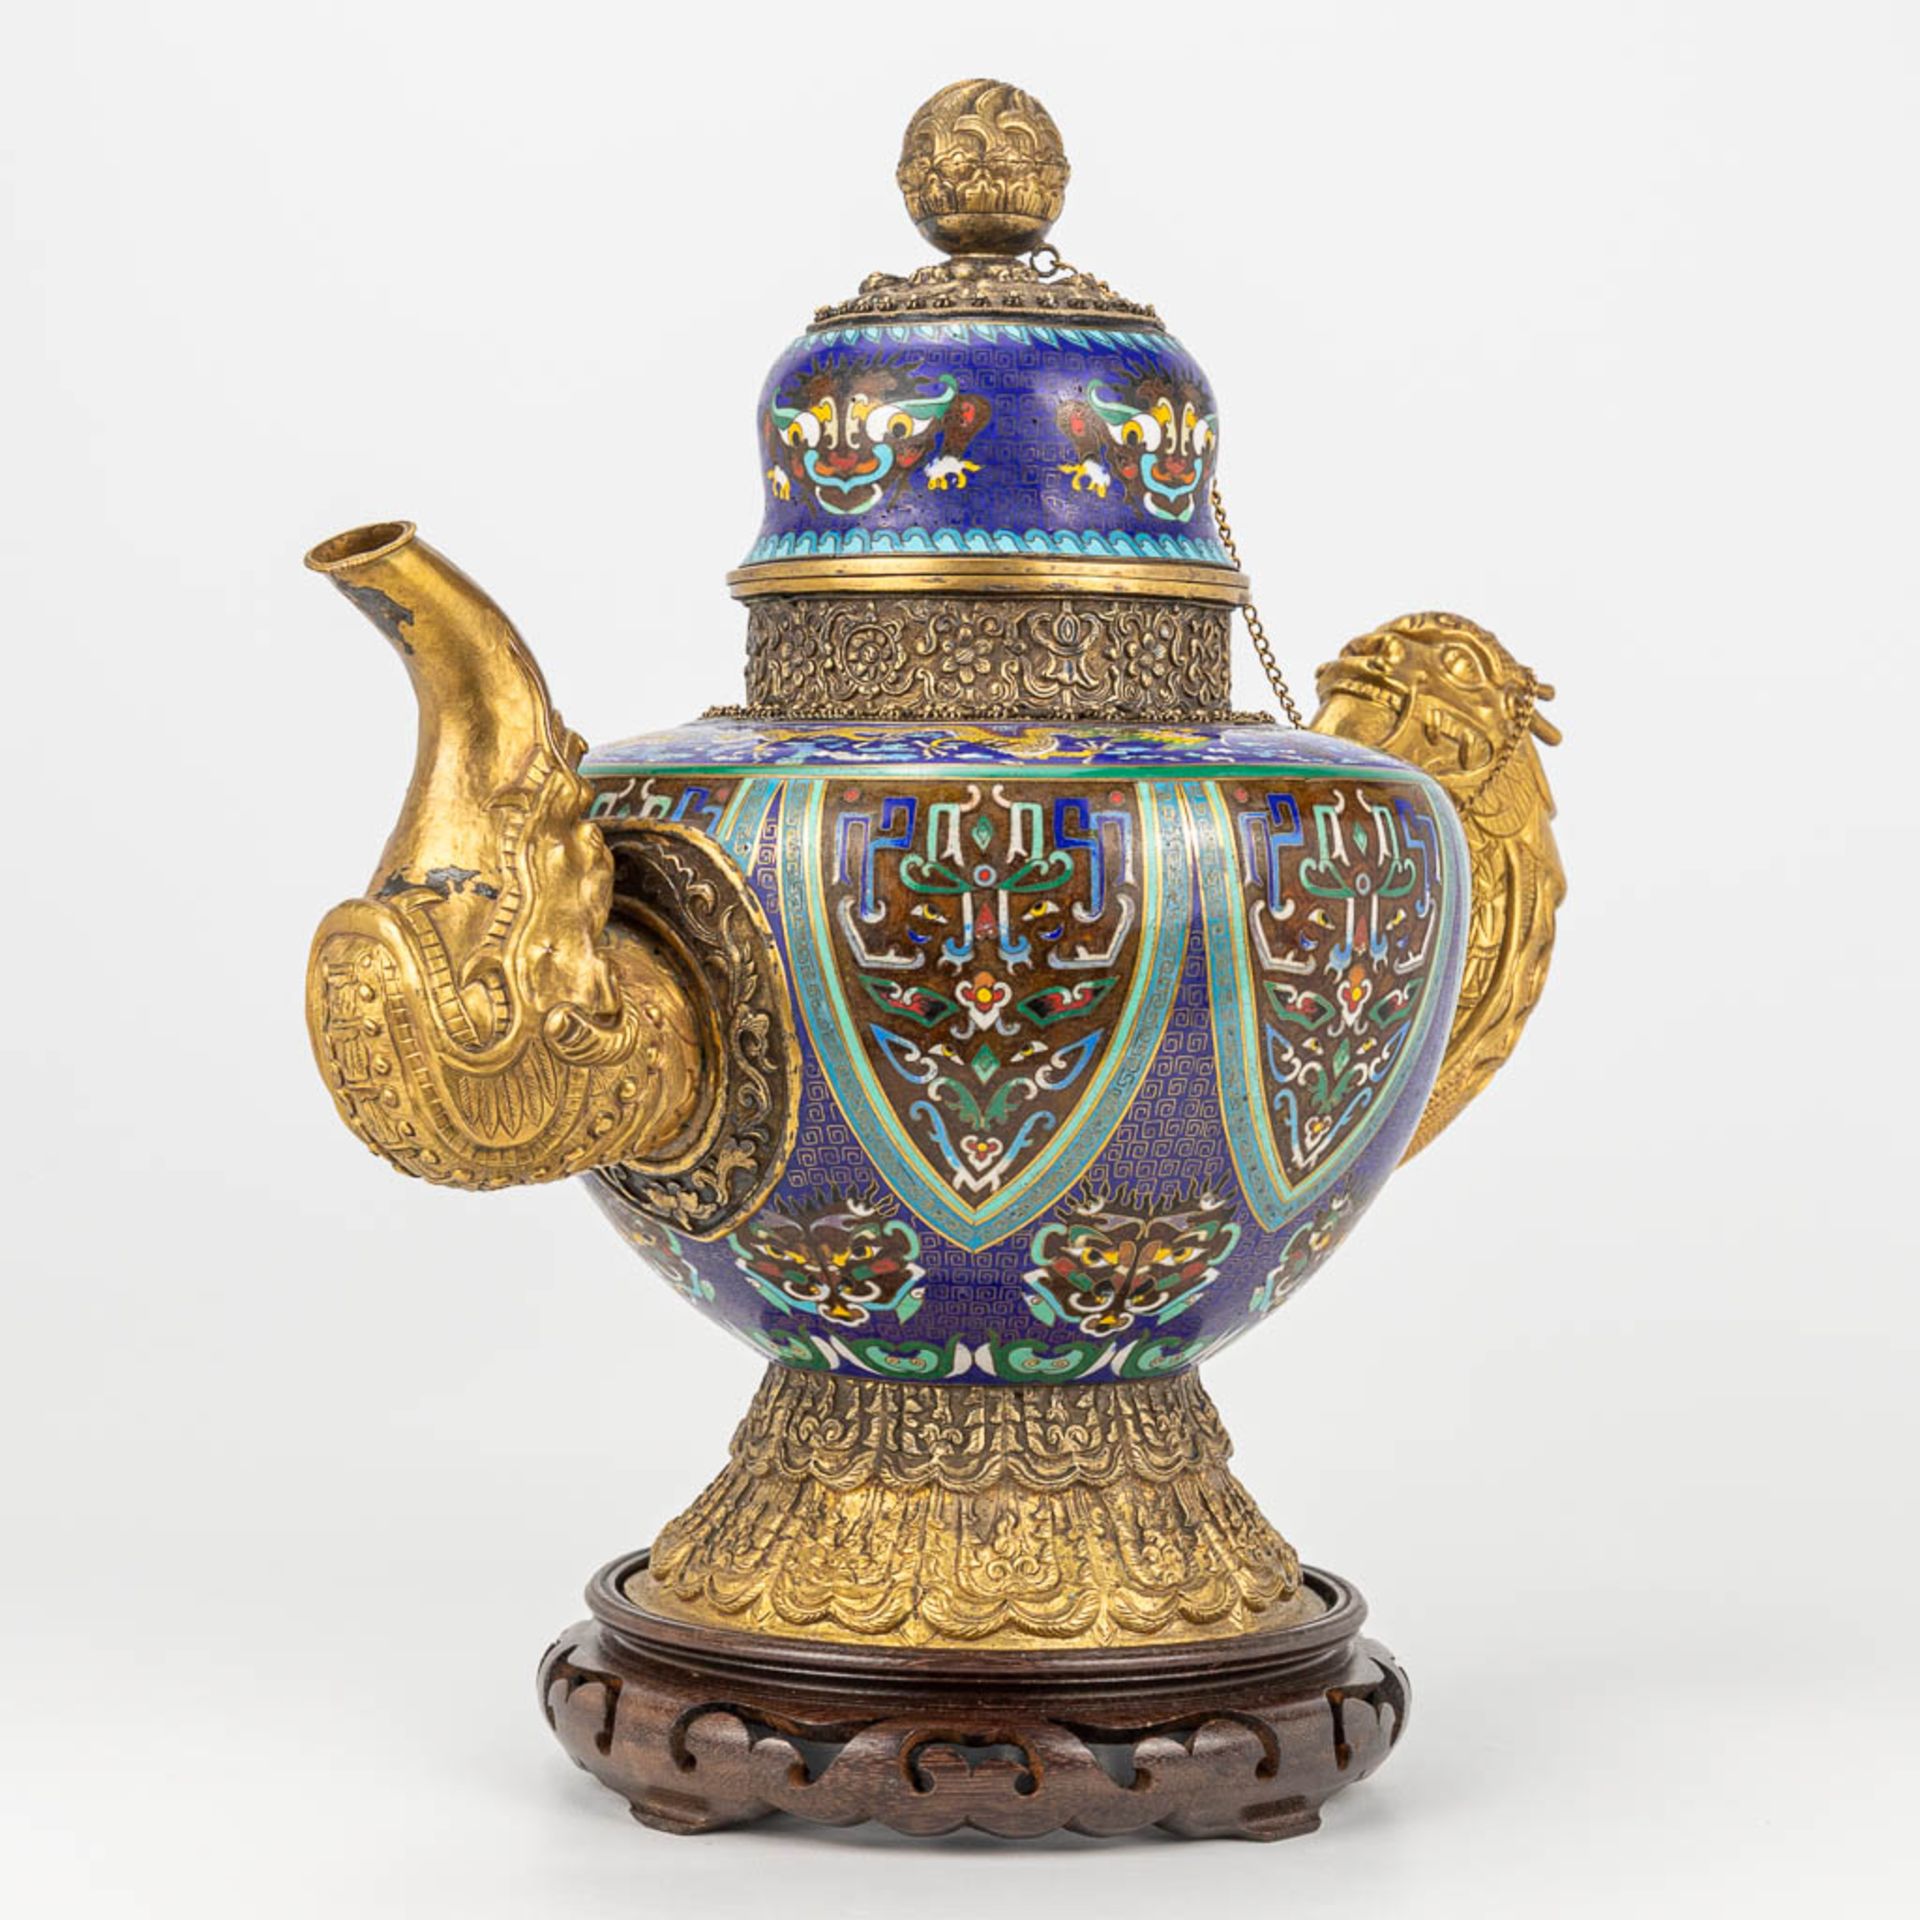 A Tibetan ceremonial ewer made of gilt bronze and finished with cloisonnŽ bronze. - Image 6 of 18